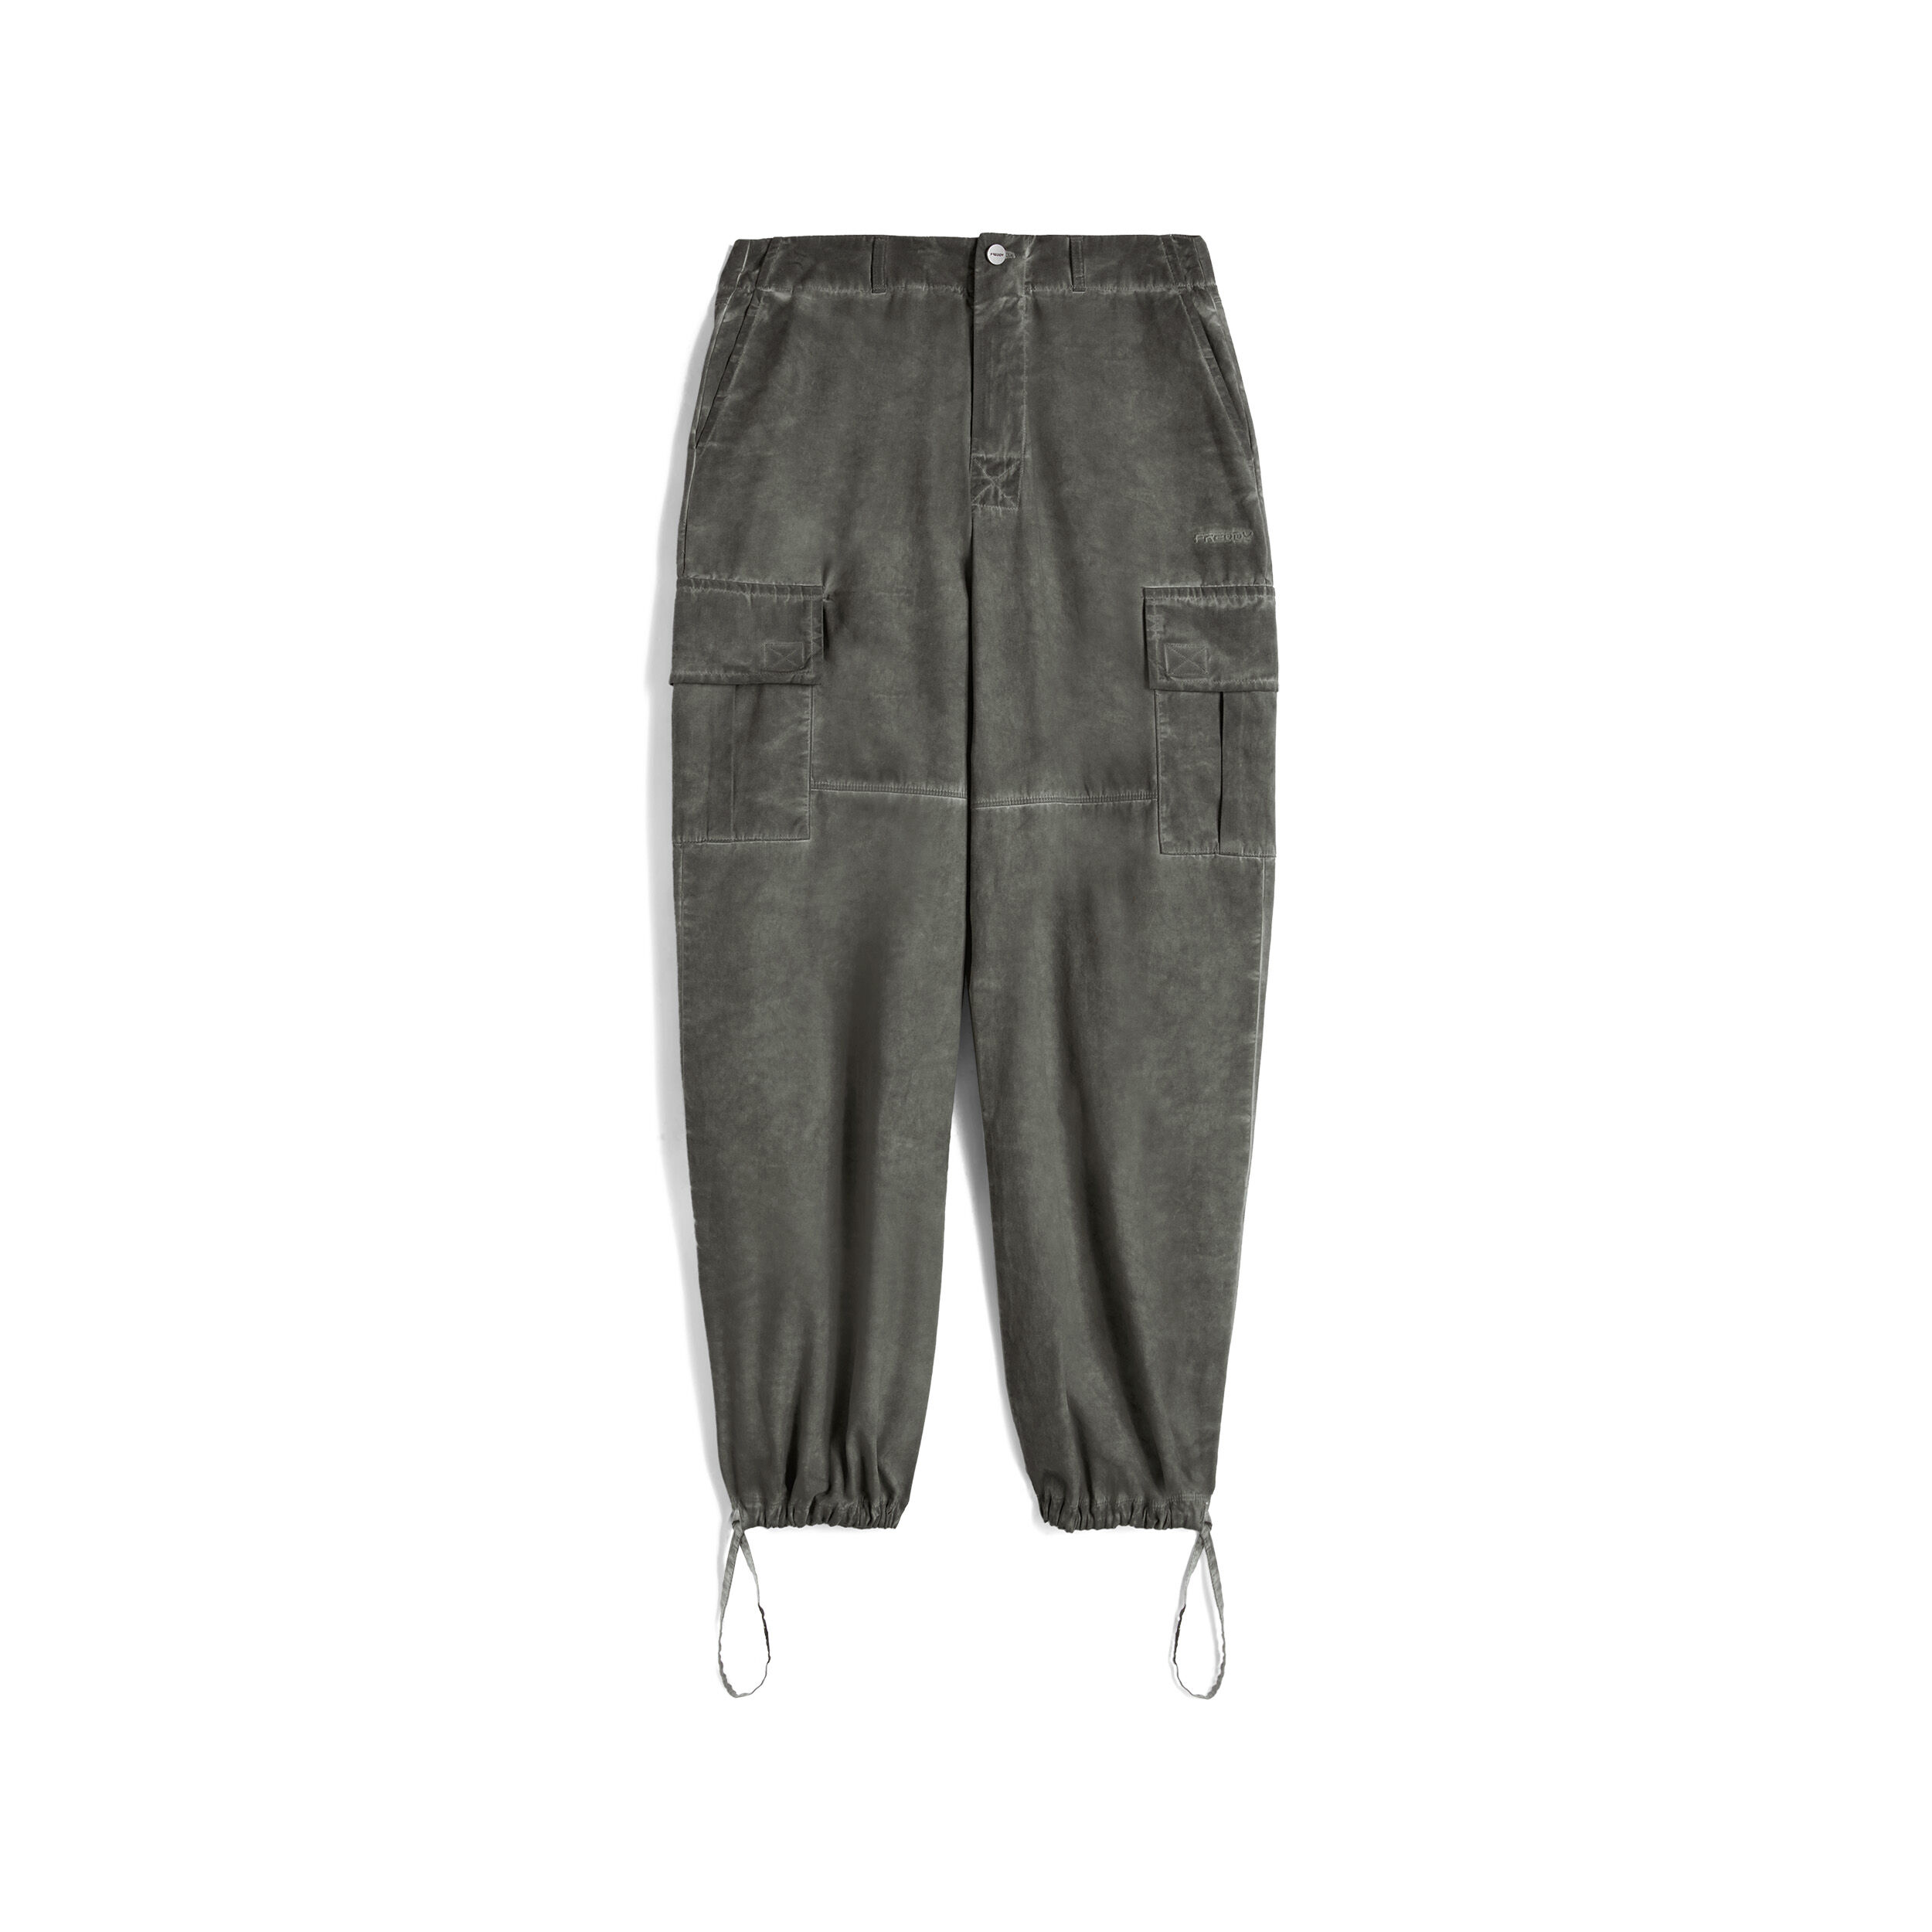 Freddy Pantaloni cargo in canvas tinto capo cold dyed Gray Asphalt Cold Died Donna Medium